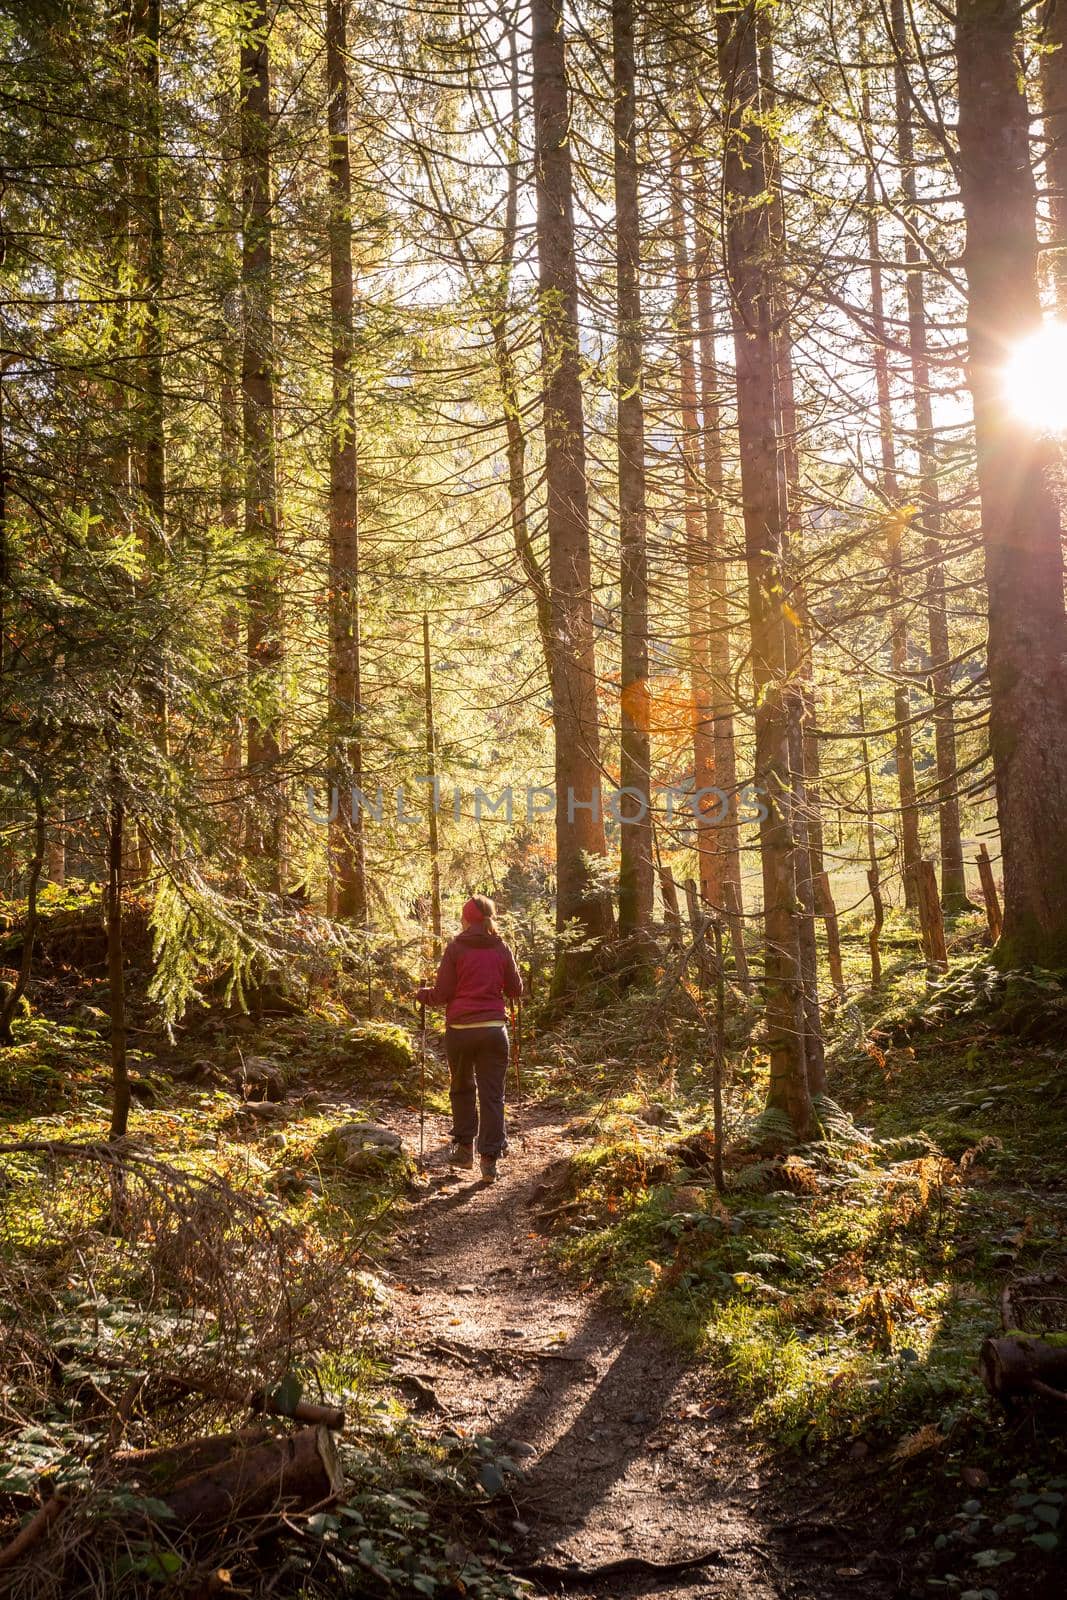 Girl in sportswear hiking in autumnal forest, warm colors